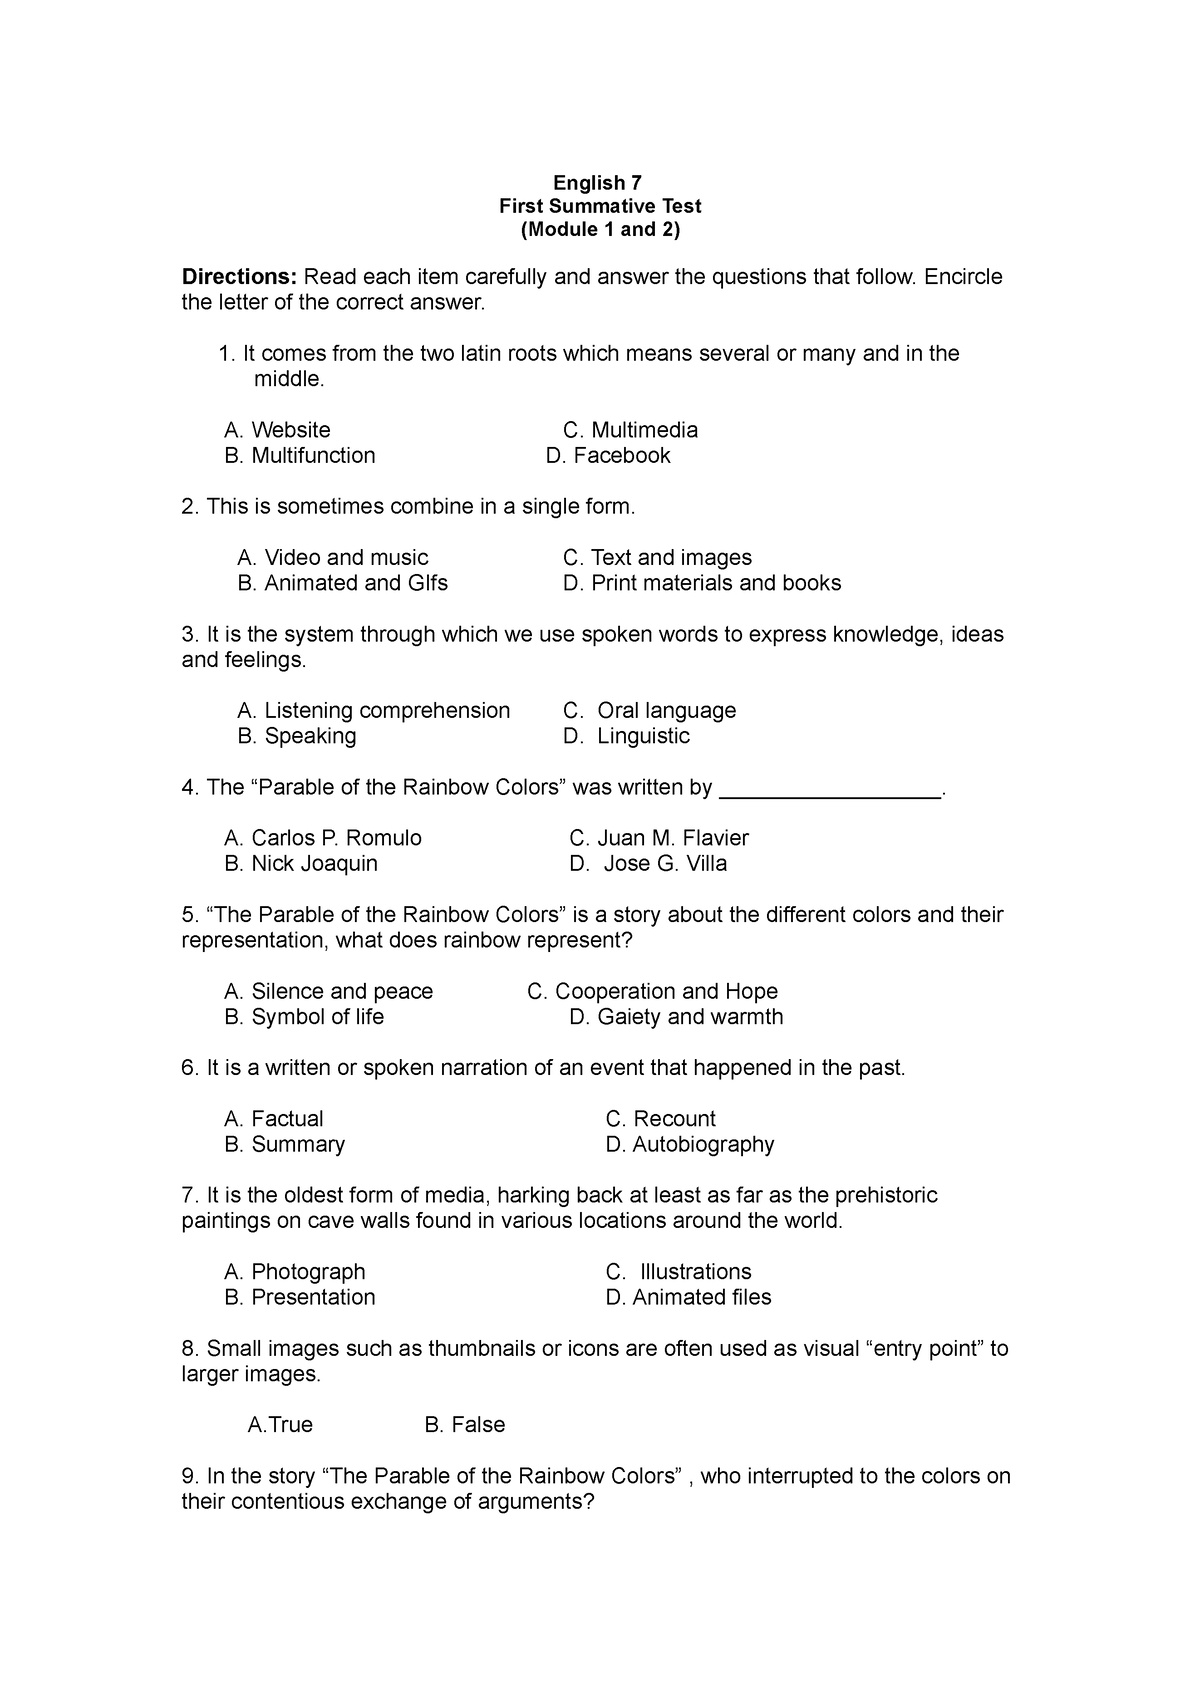 Summative Test 3rd Quarter English 7 First Summative Test Module 1 And 2 Directions Read 6487